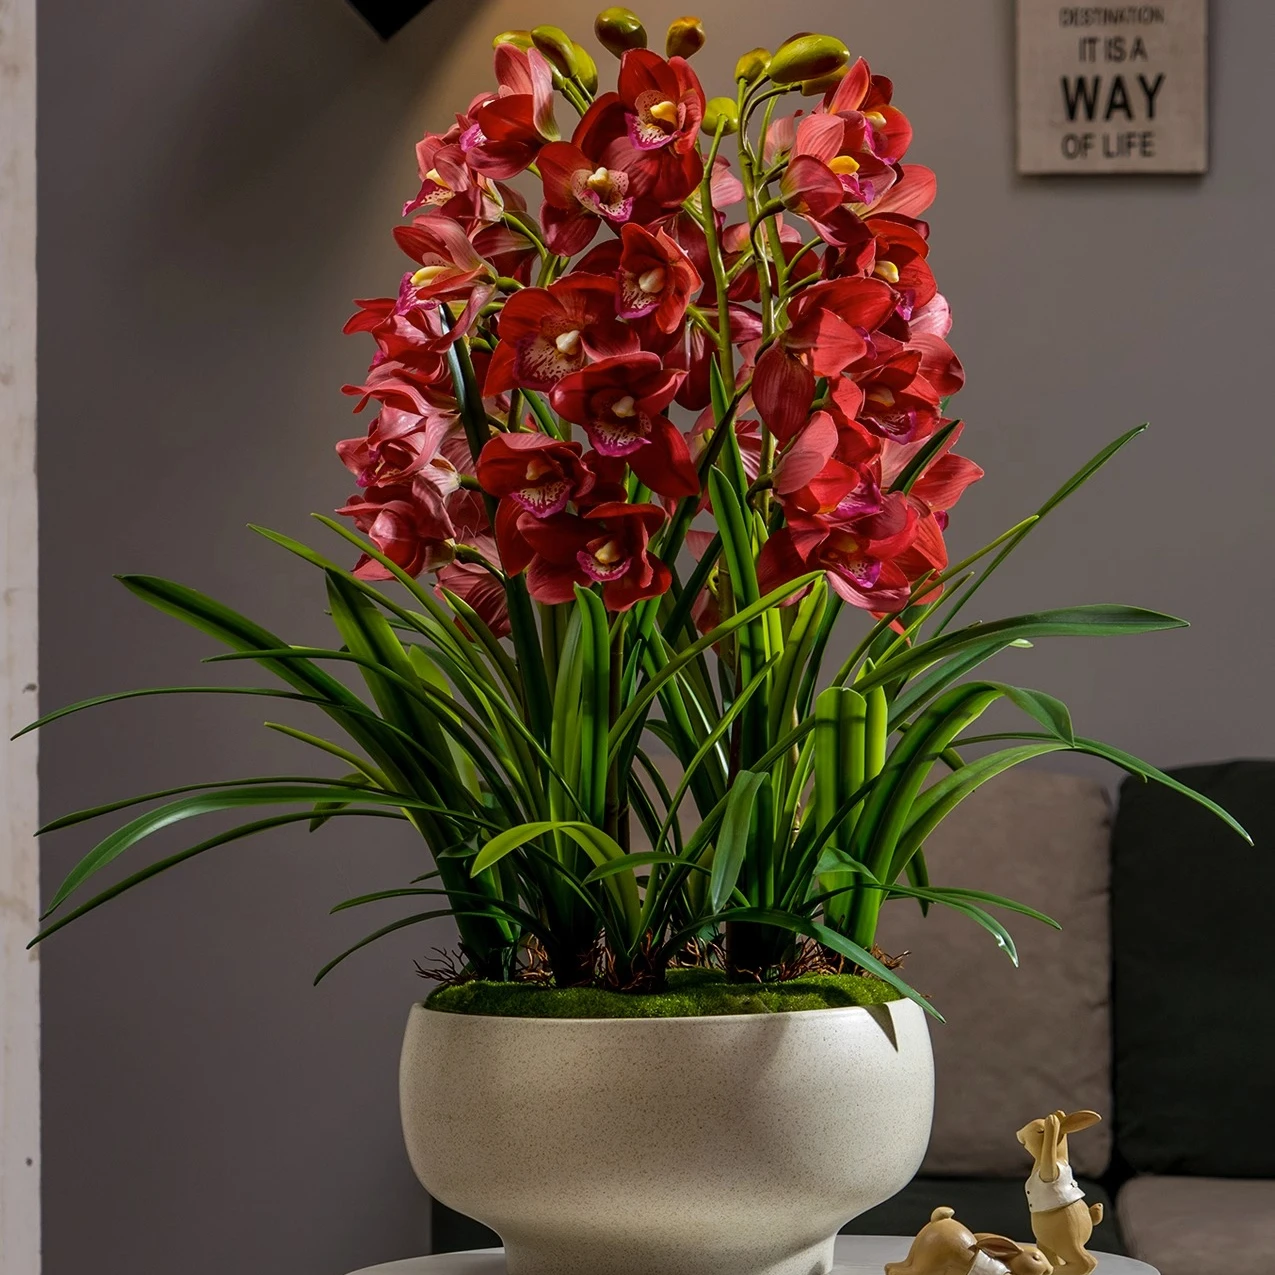 Hot seller Real Touch Artificial Orchid Flowers For Home Decoration Butterfly Orchid Phalaenopsis Flower Potted Plants